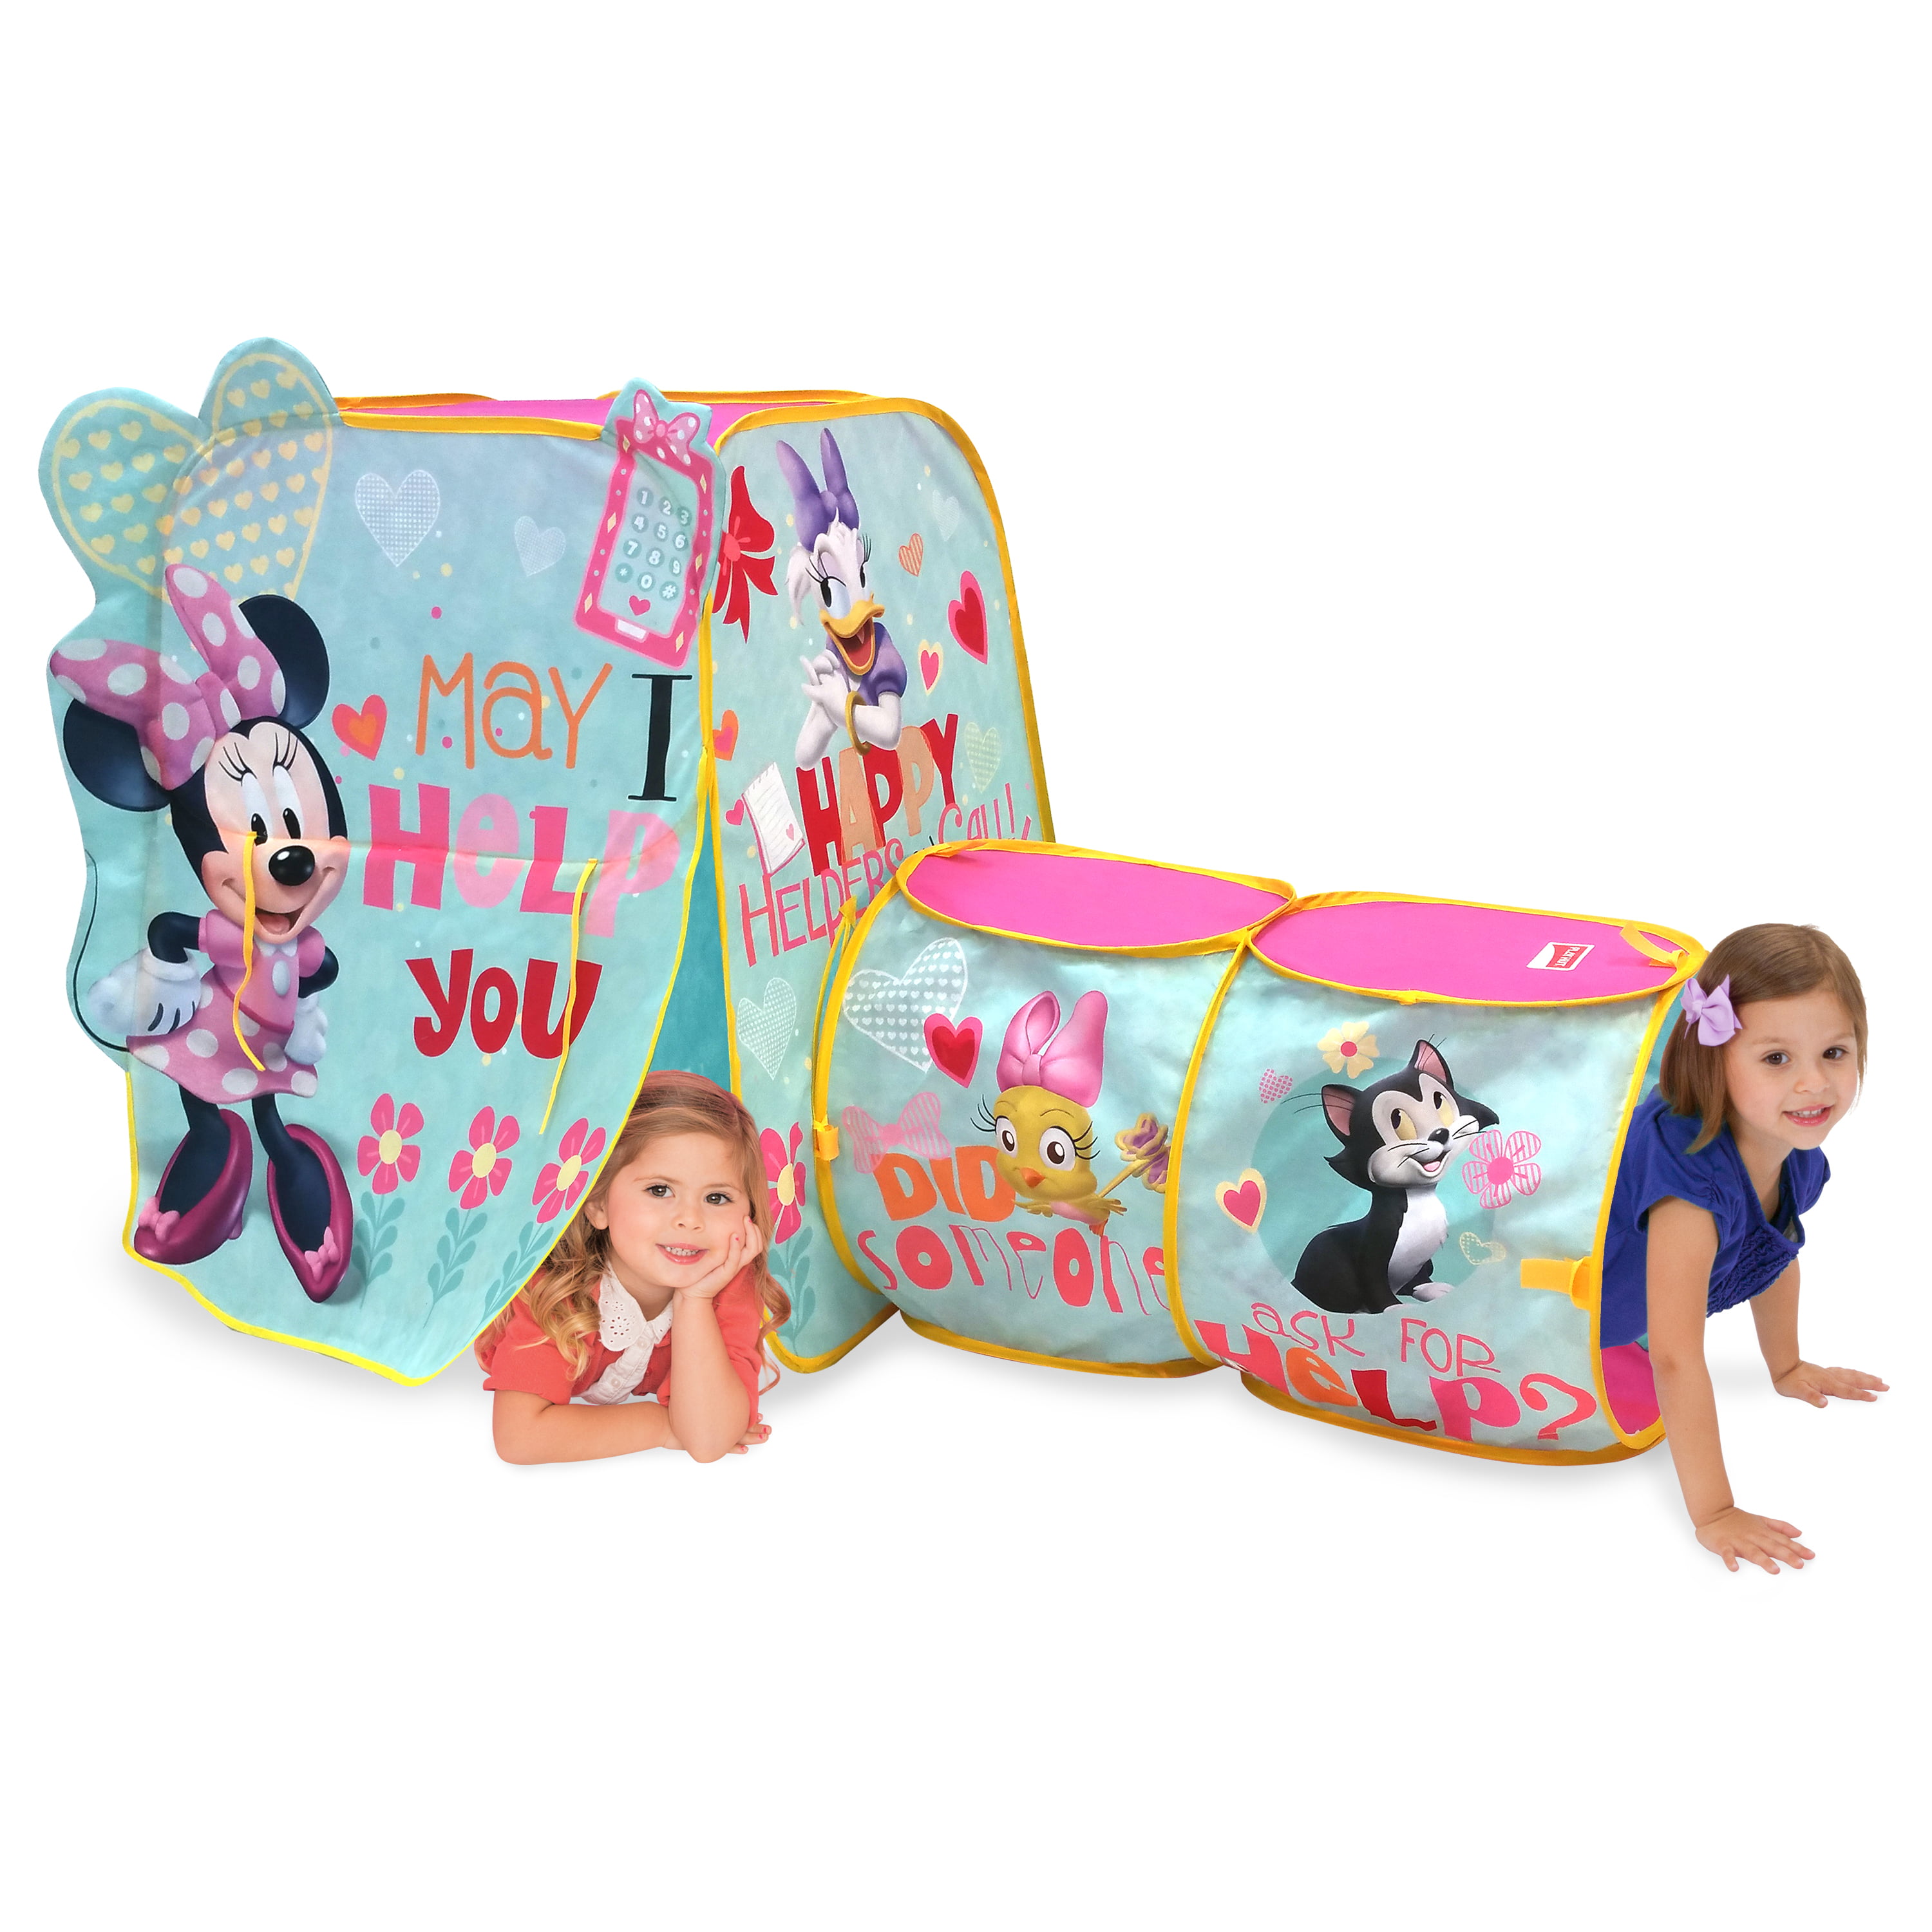 minnie mouse cottage play tent